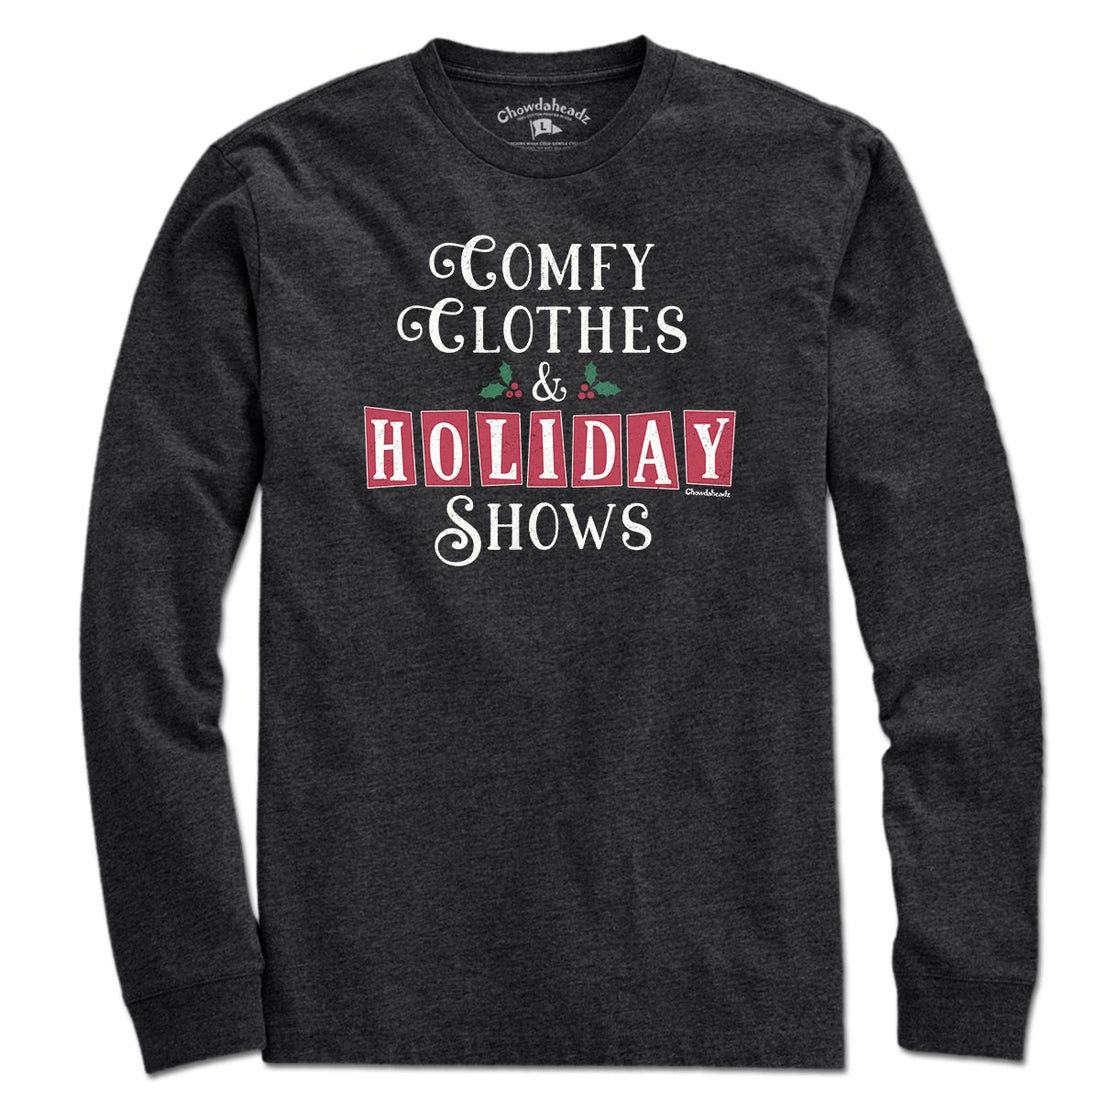 Comfy Clothes & Holiday Shows T-Shirt - Chowdaheadz